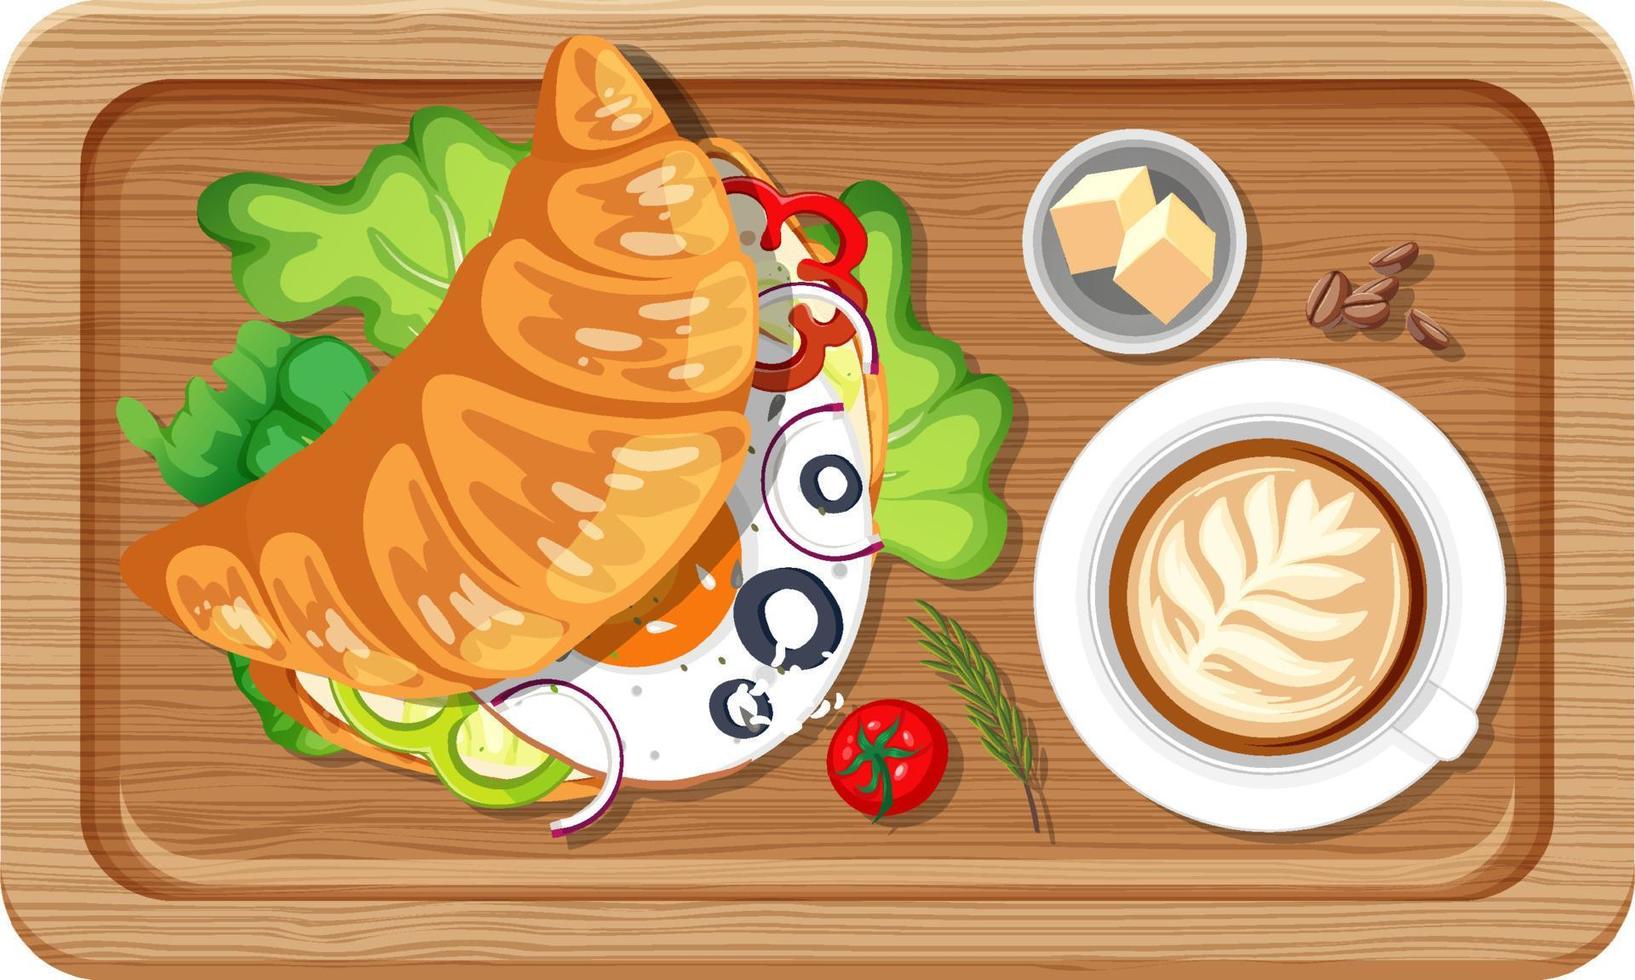 Top view of breakfast on a wooden tray vector